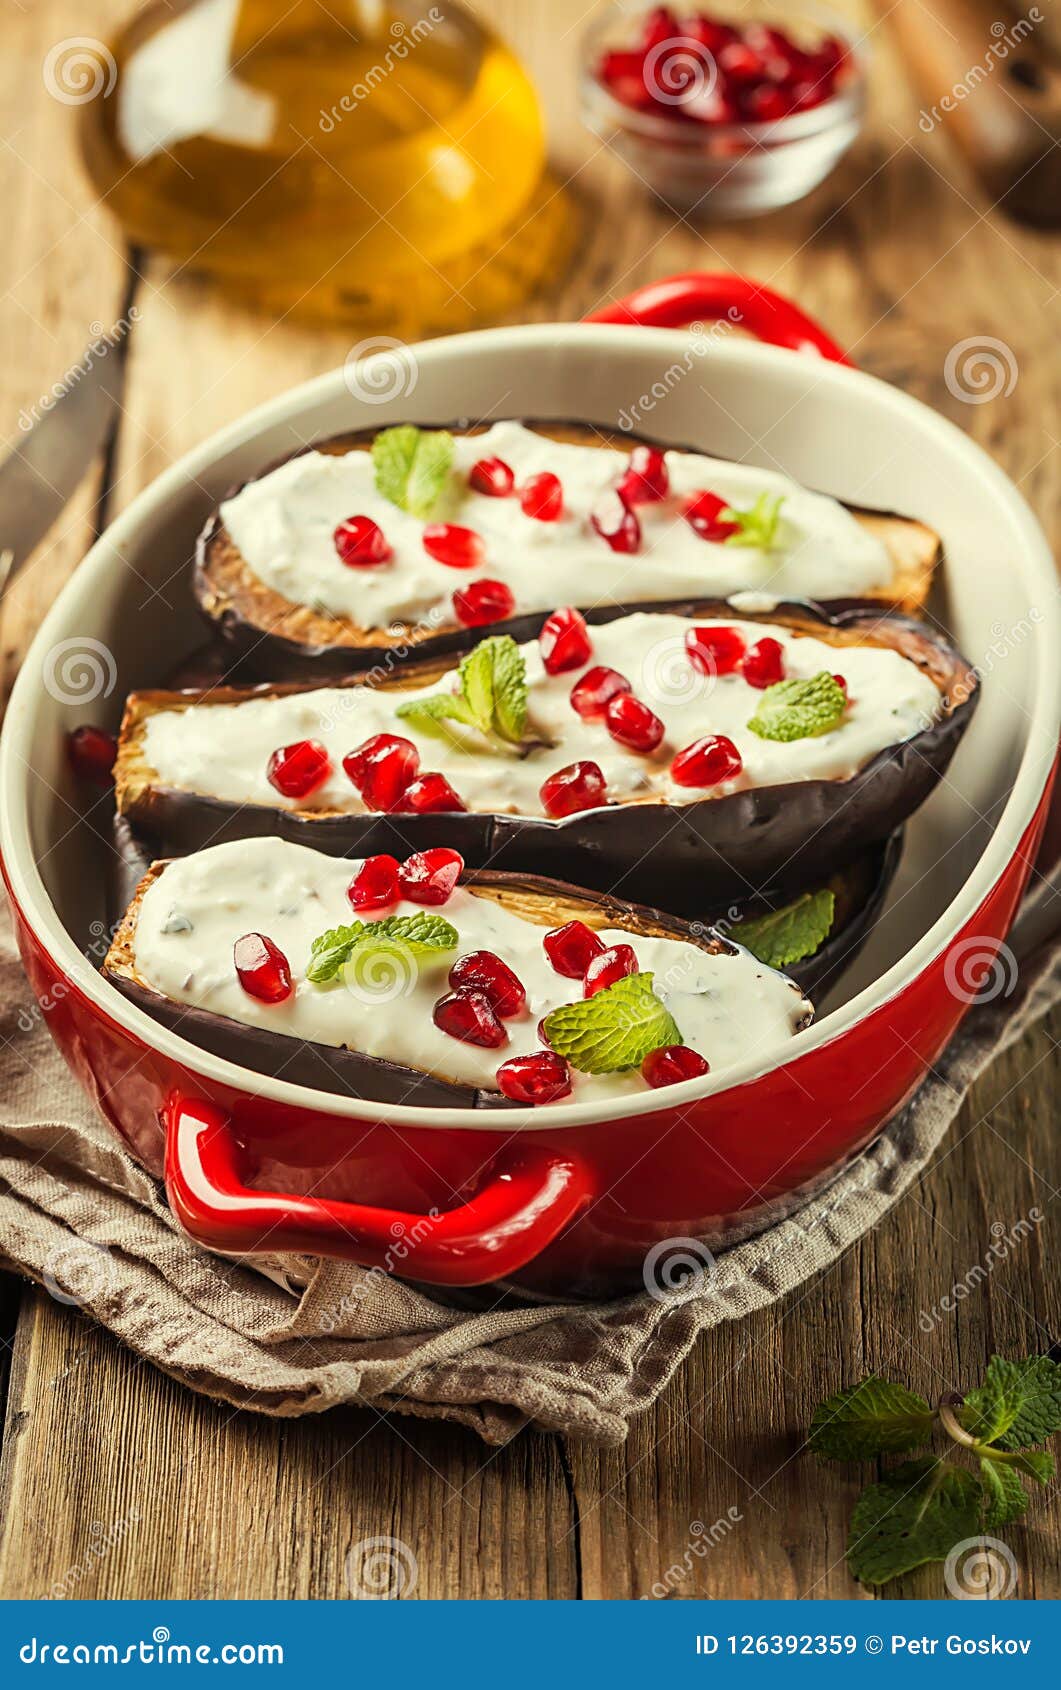 Grilled Eggplants With Sauce Stock Image - Image of appetizing ...